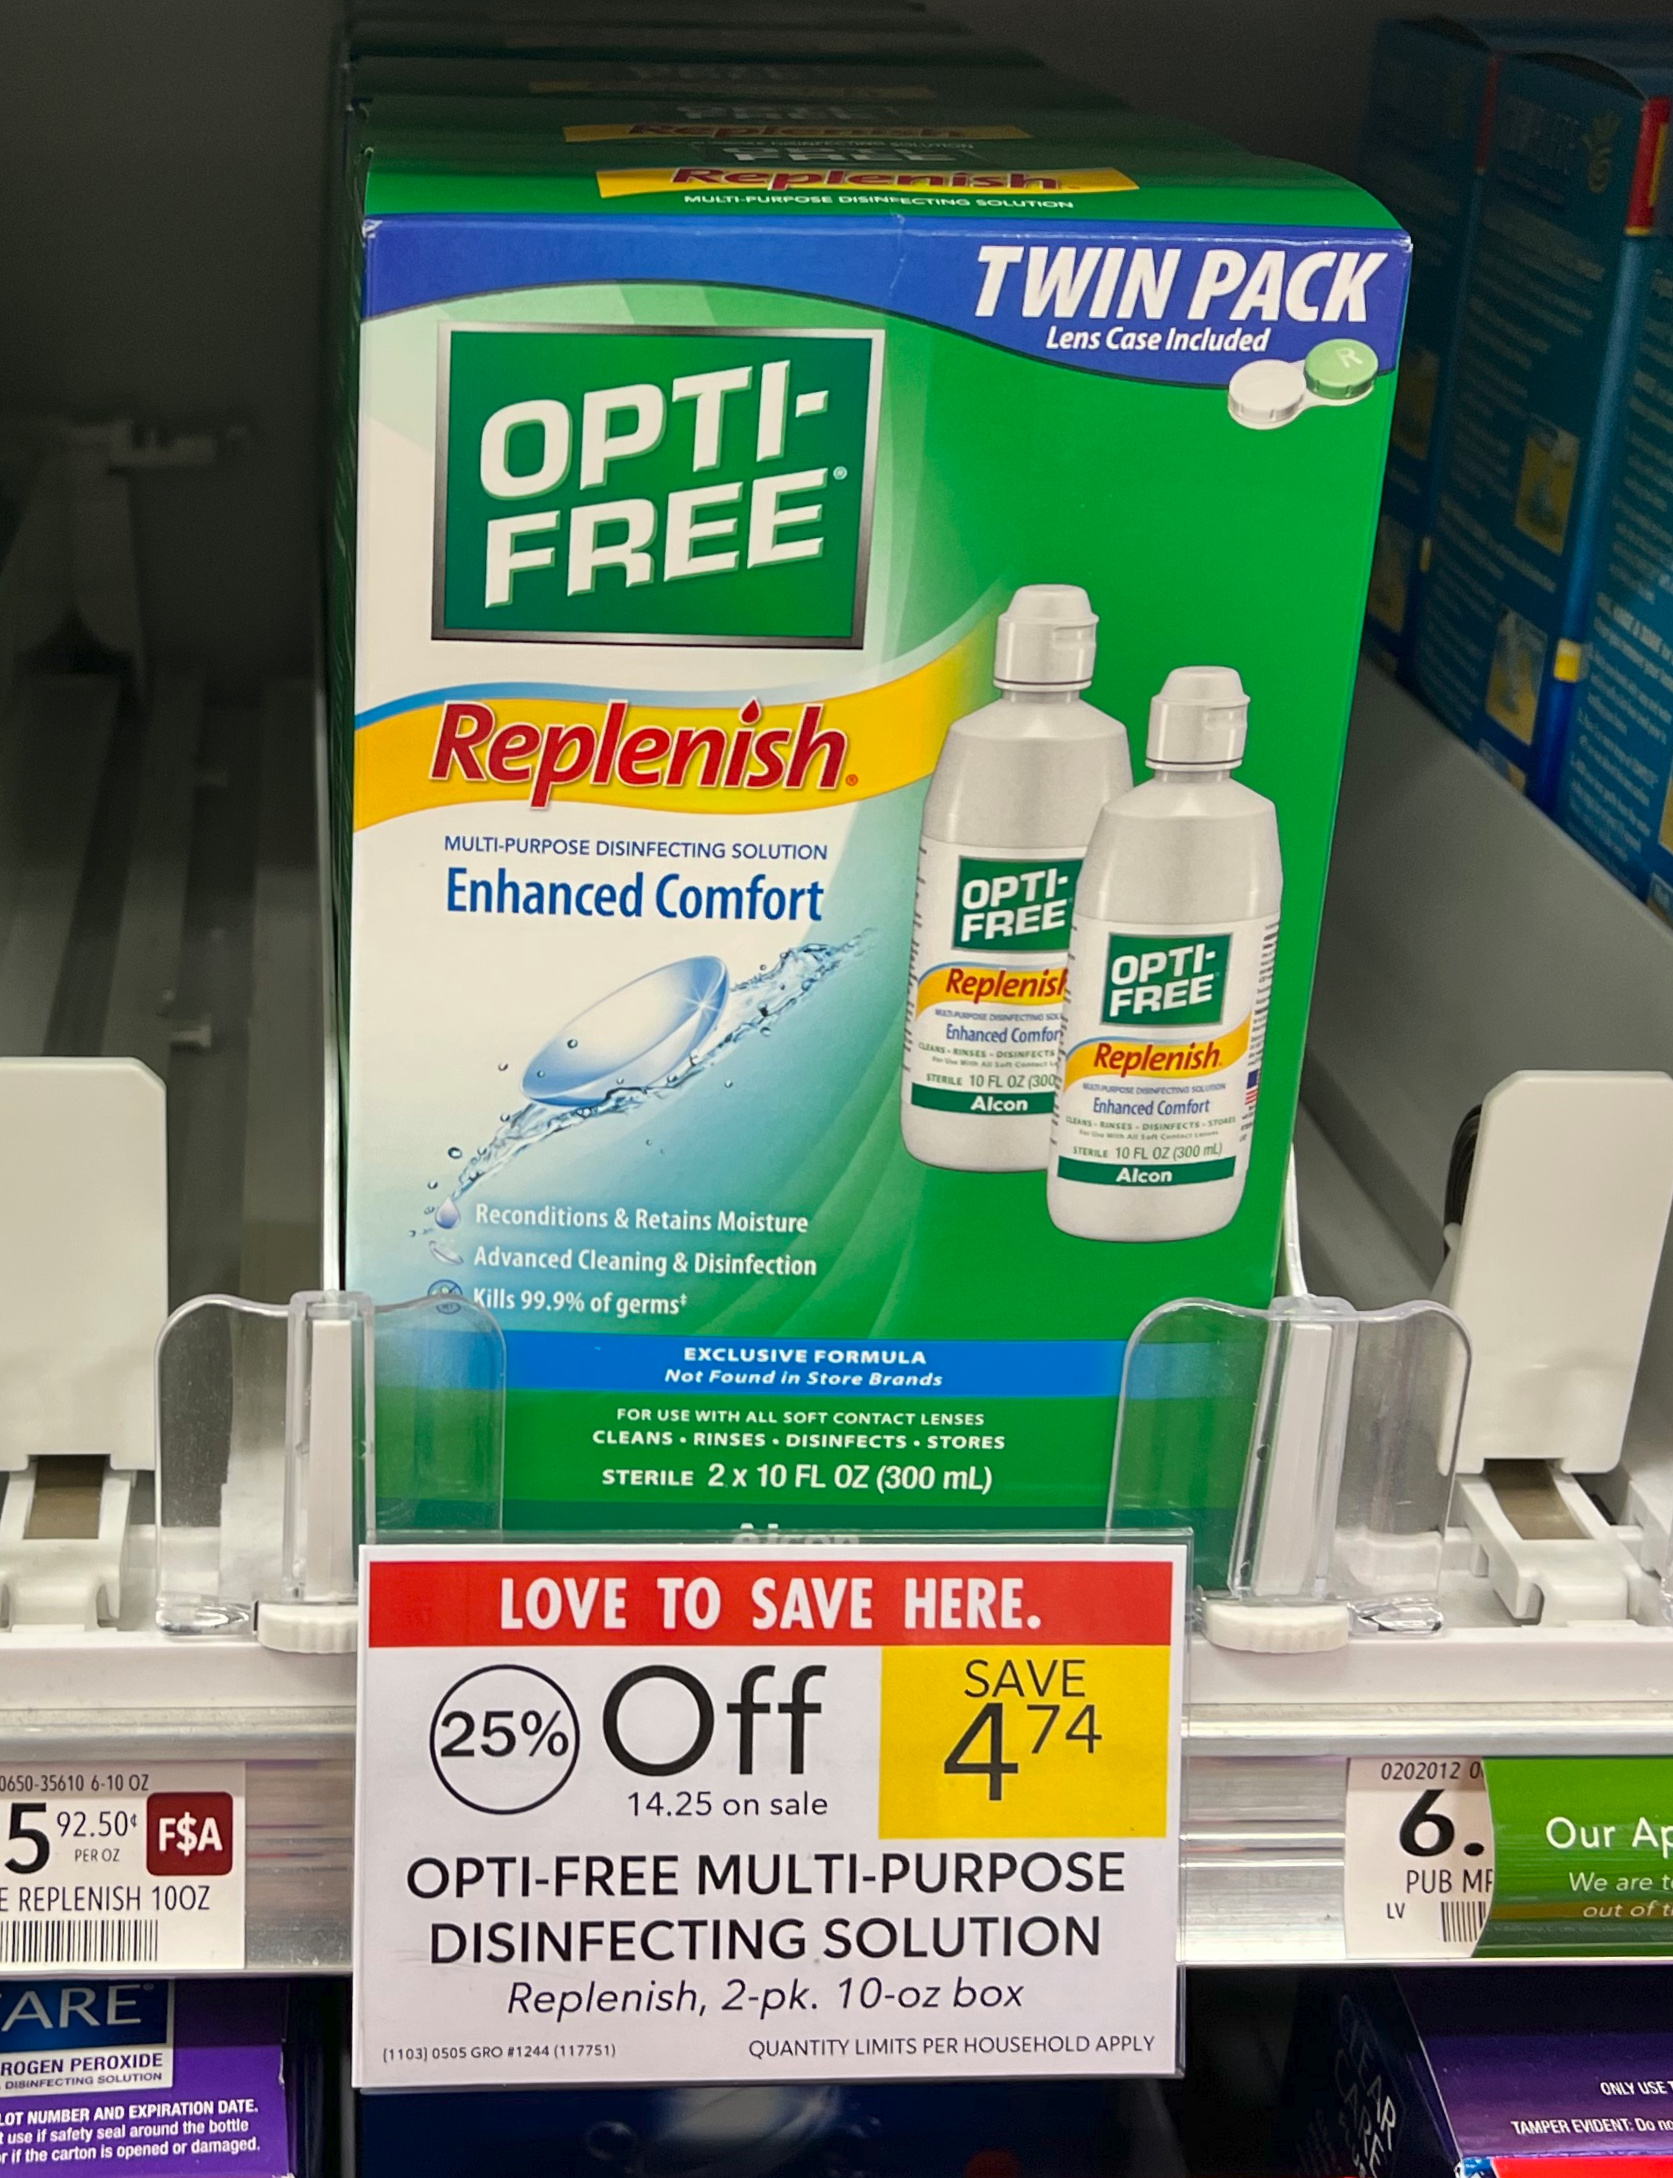 OptiFree Solution Twin Pack Just 8.25 At Publix (4.13 Per Bottle